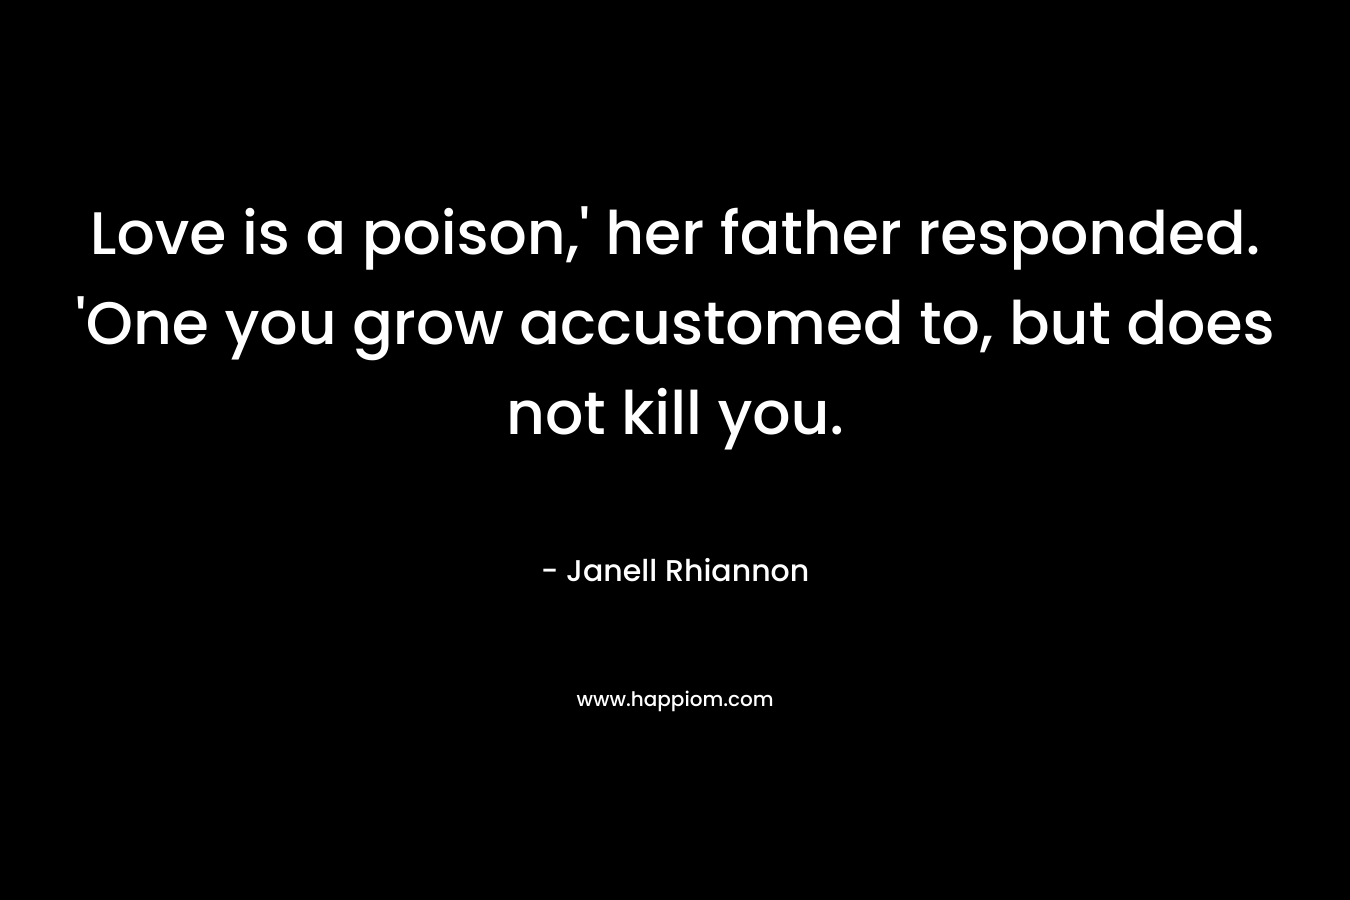 Love is a poison,’ her father responded. ‘One you grow accustomed to, but does not kill you. – Janell Rhiannon